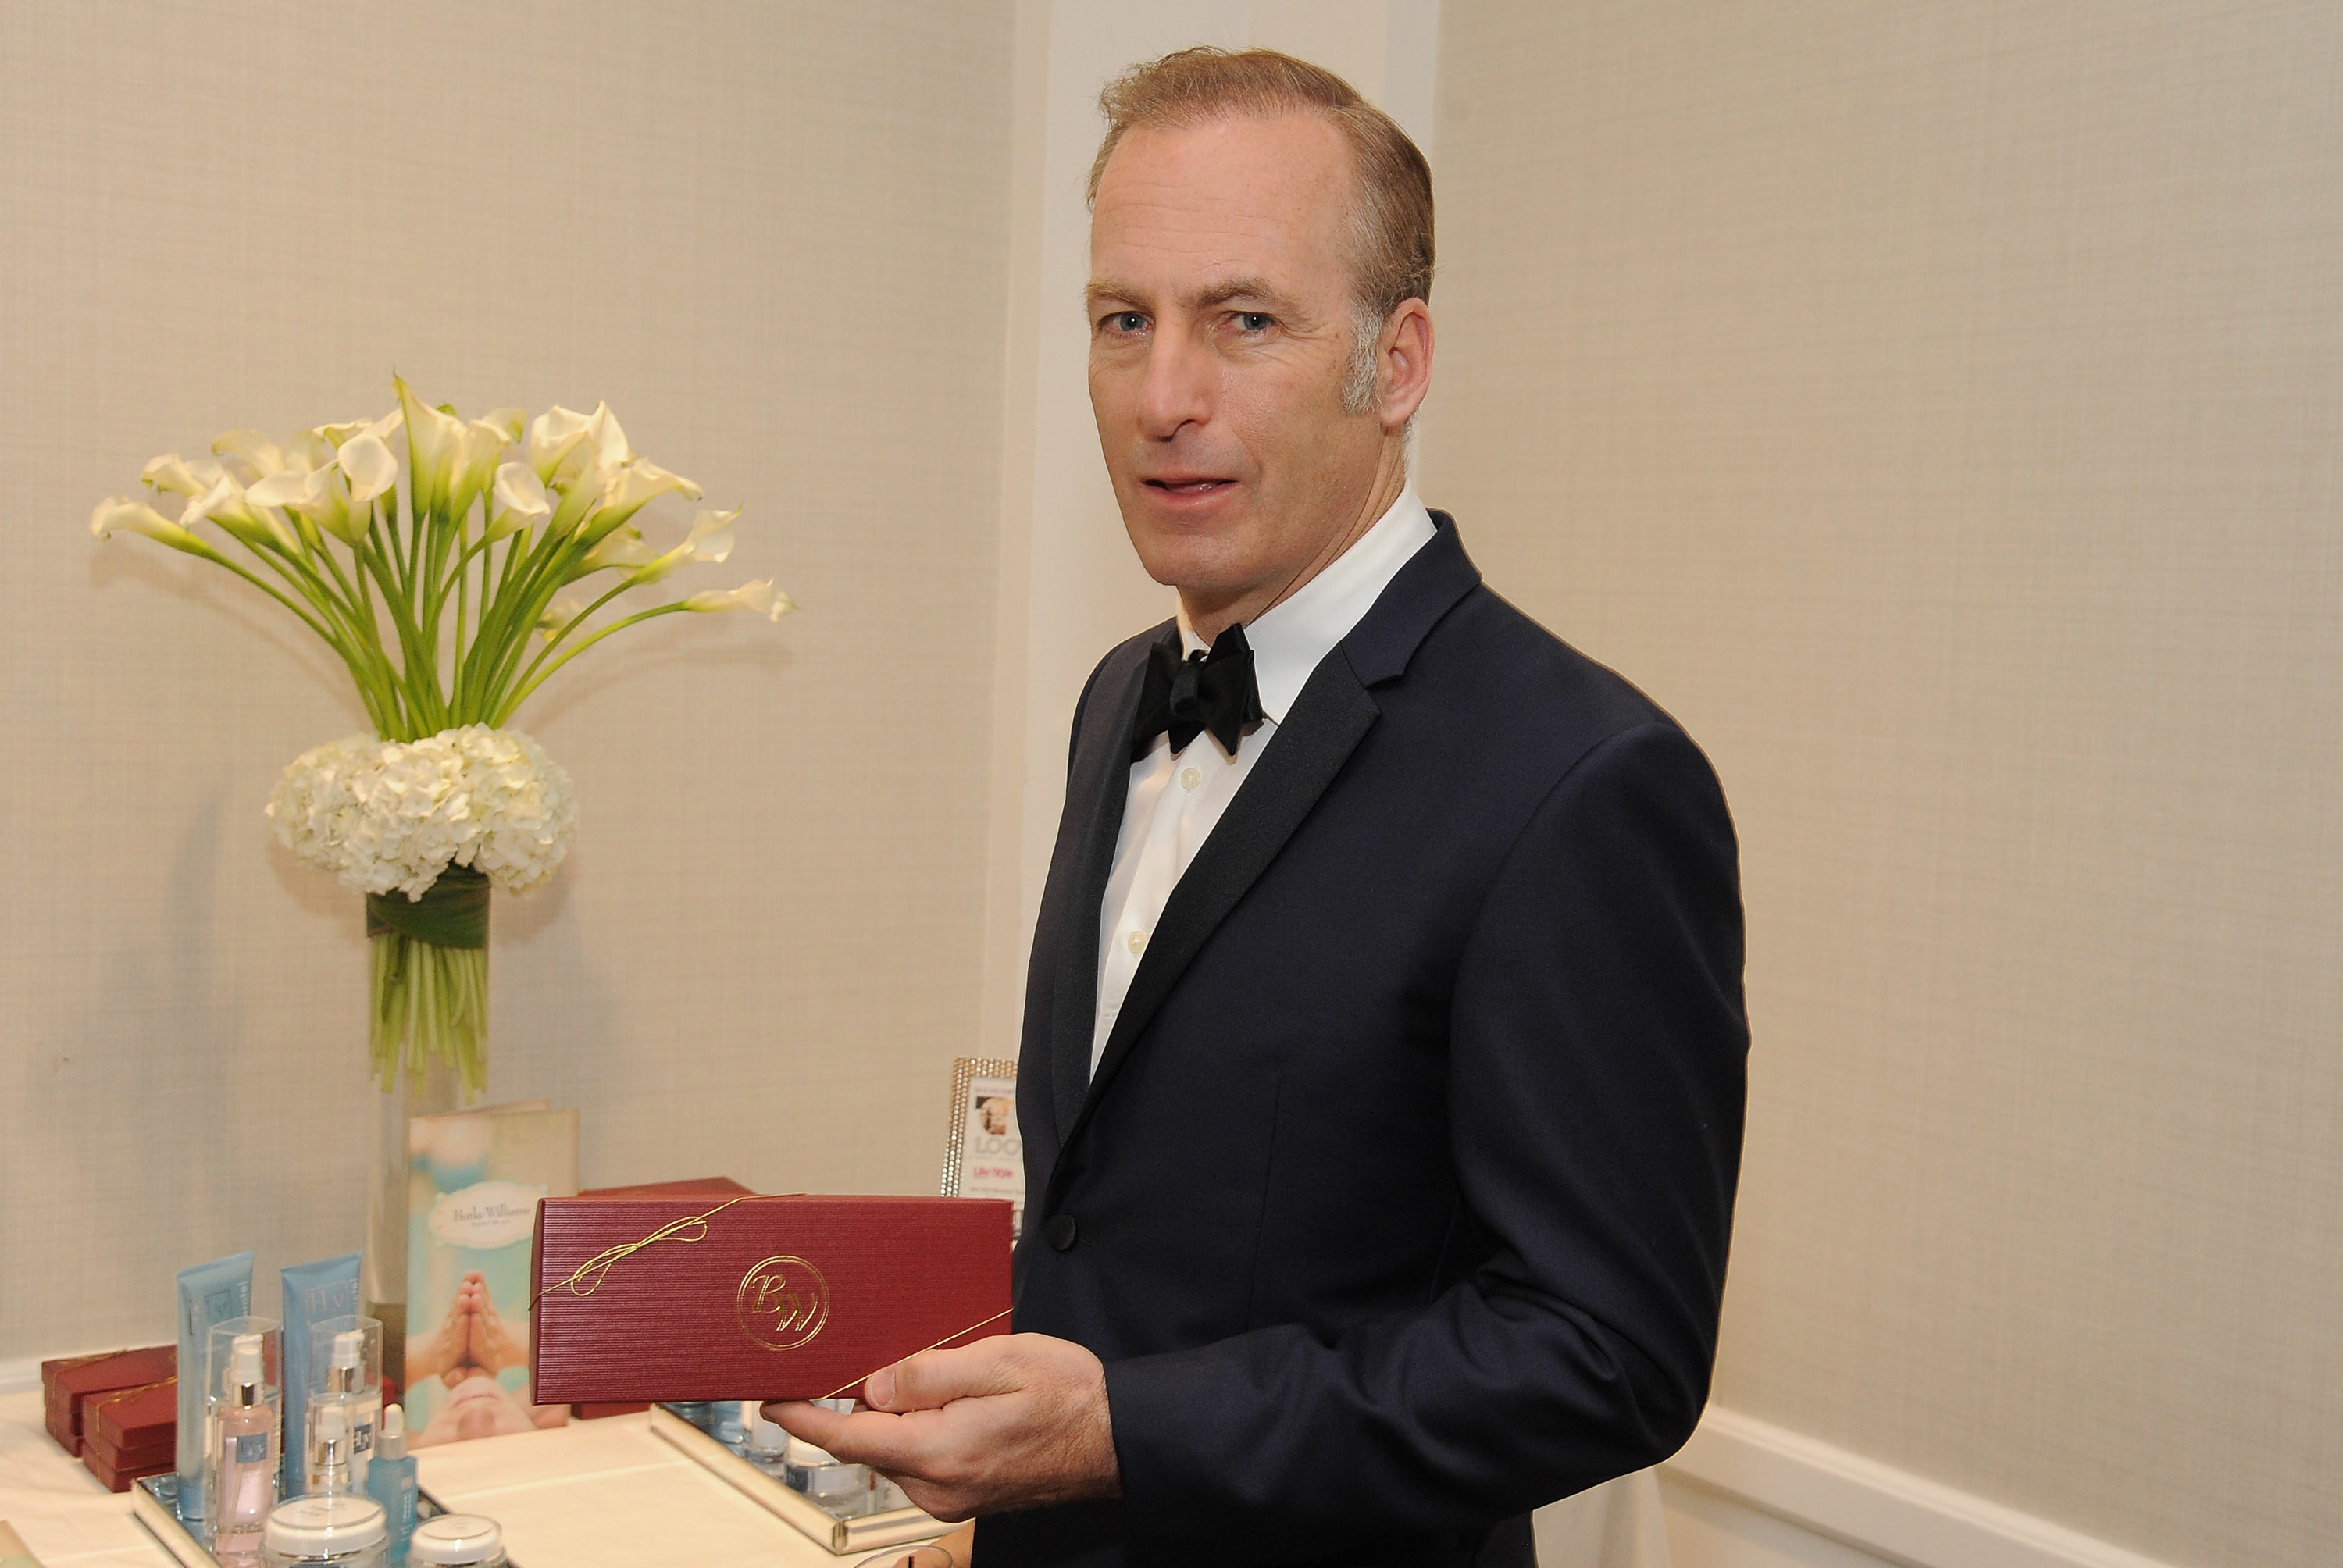 Odenkirk holds a red box while standing in front of products